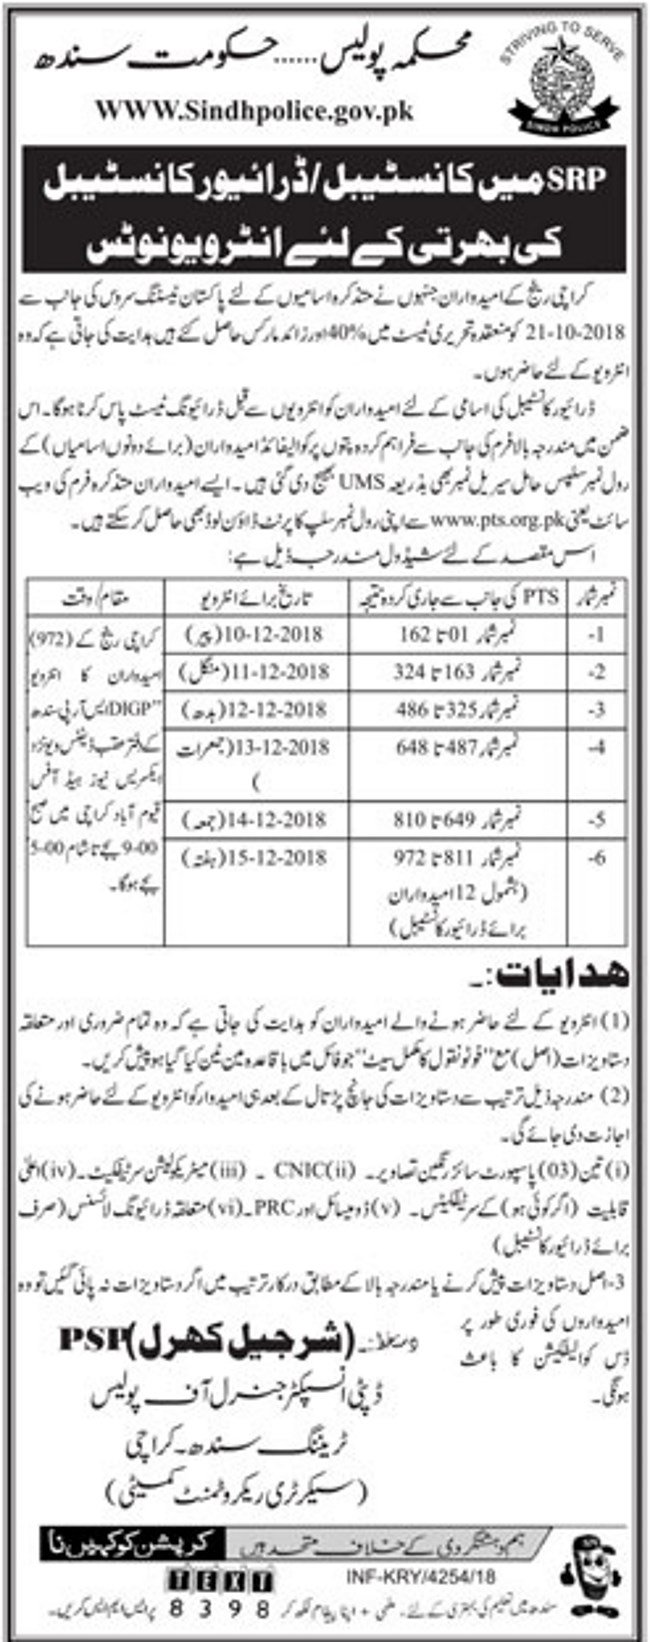 Interview Notice for Sindh Police Constables & Driver Constables